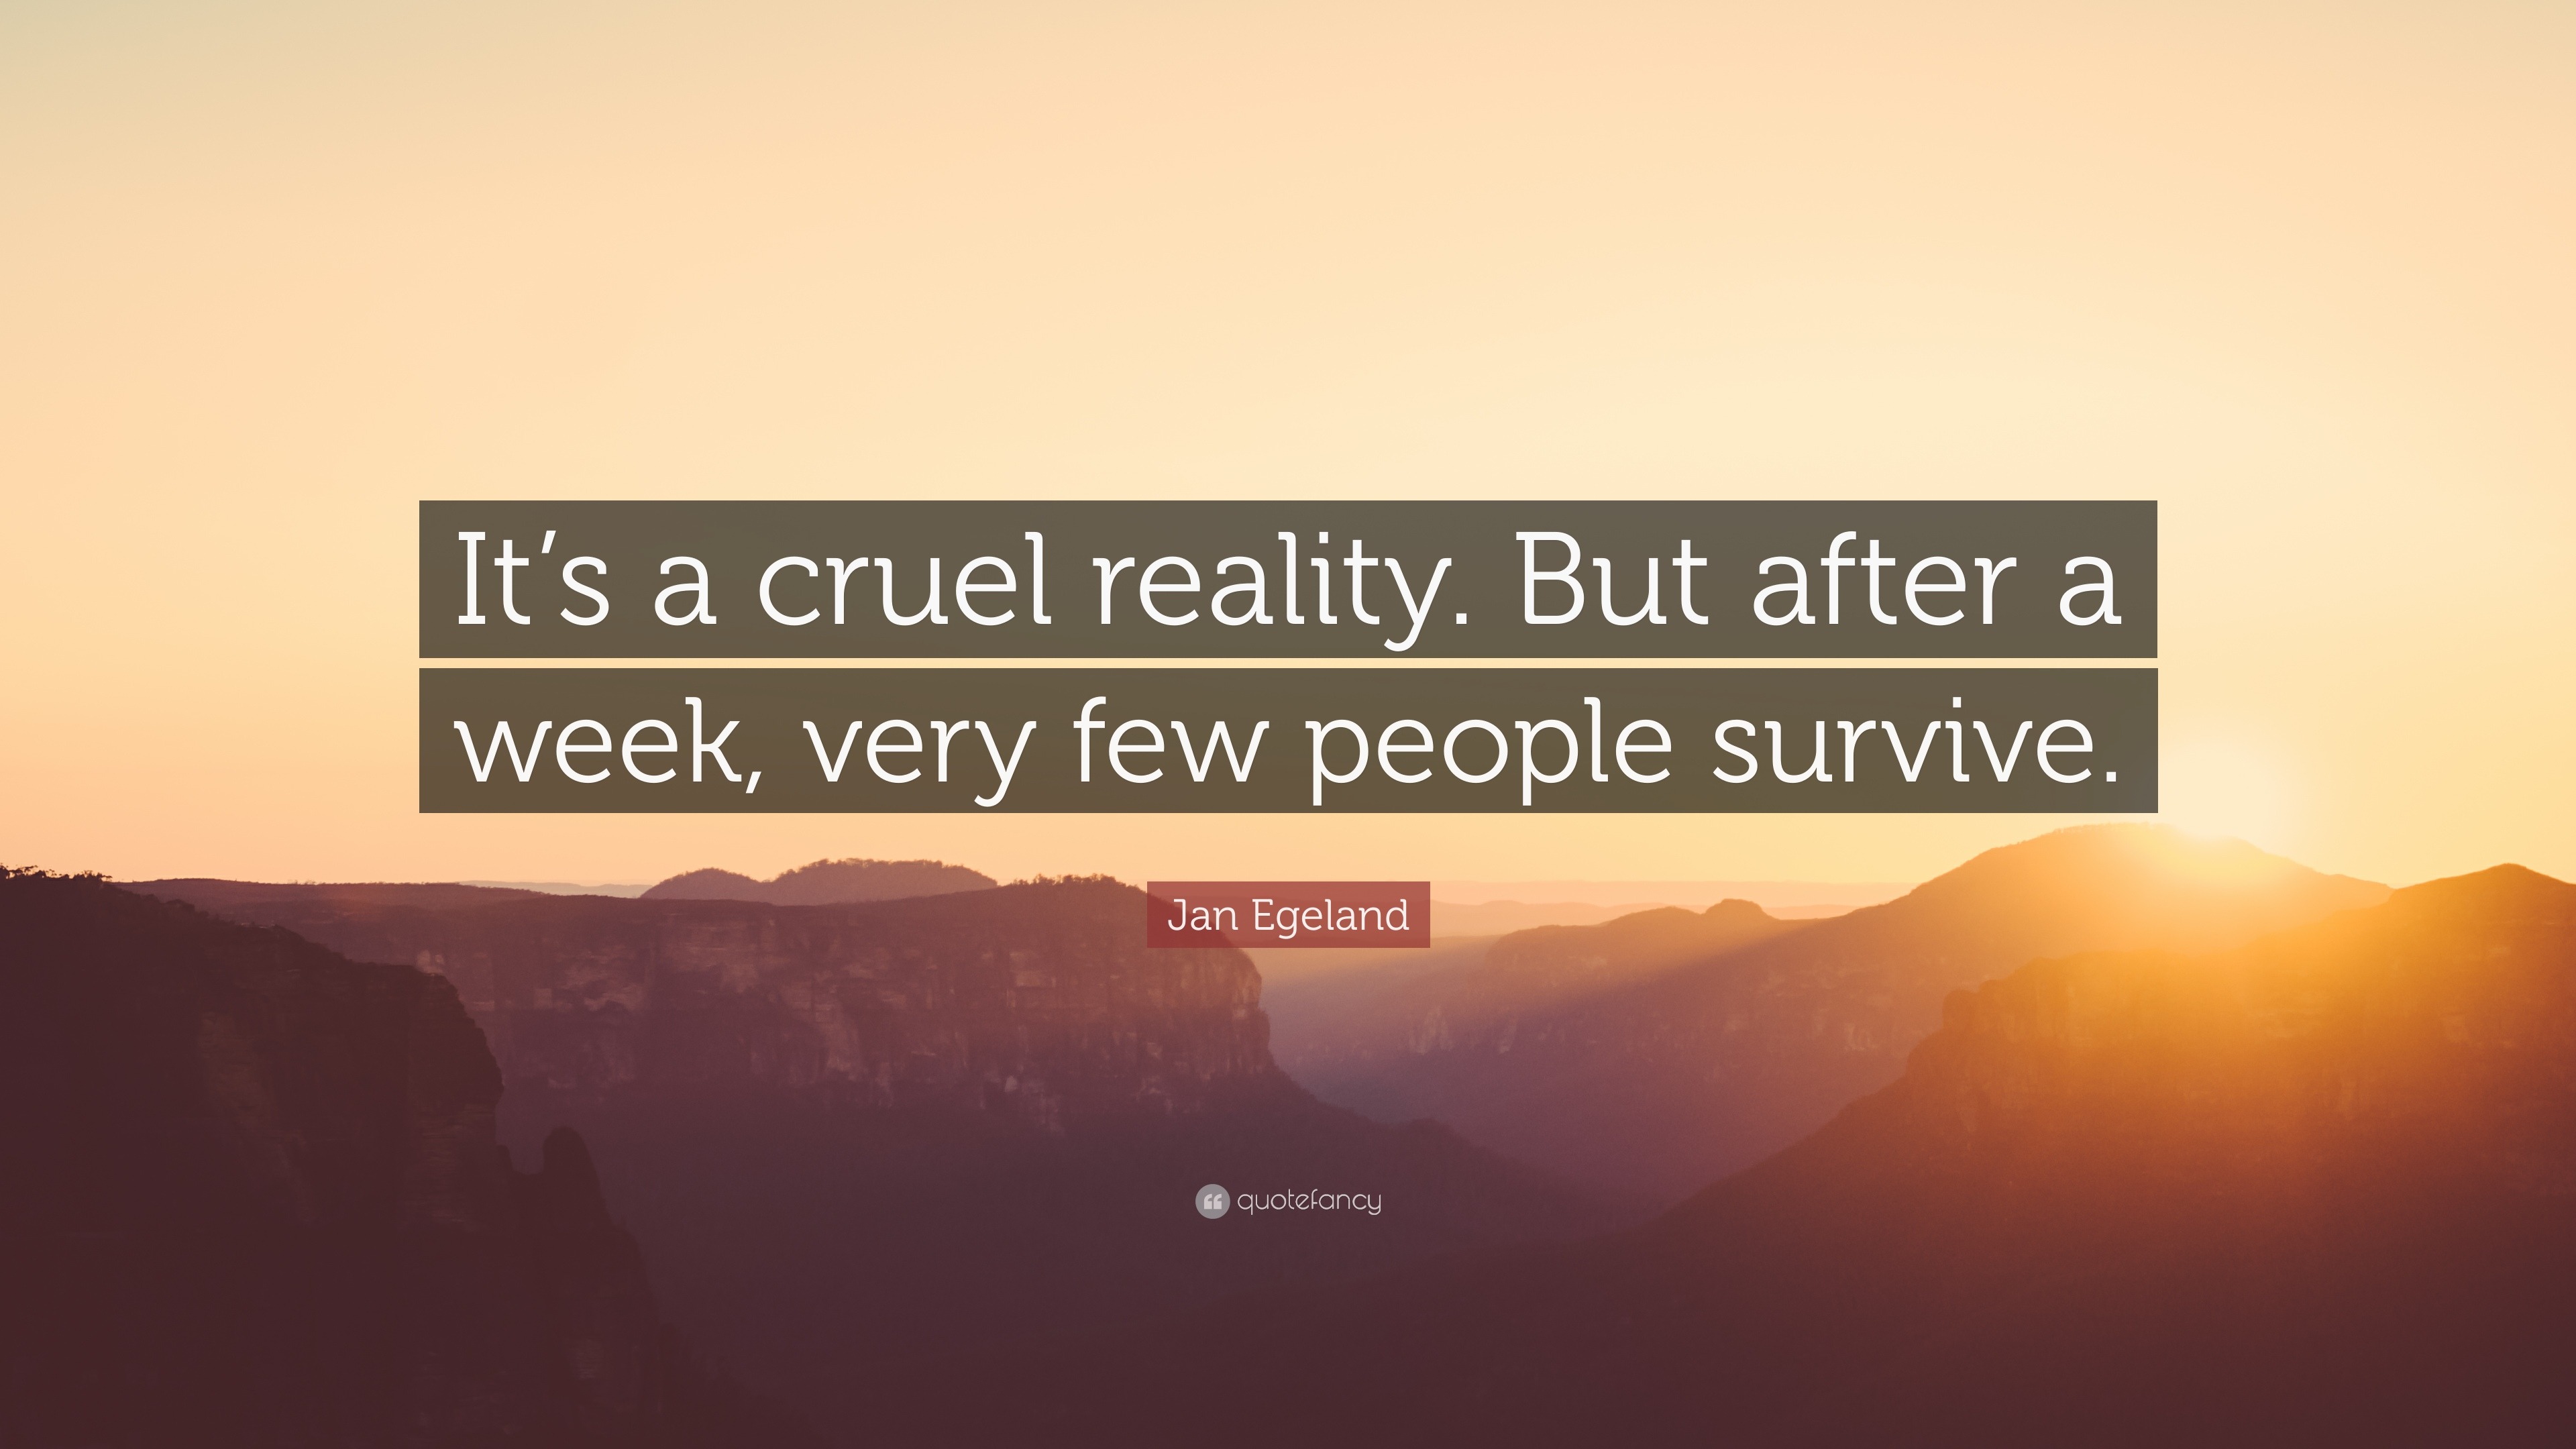 Jan Egeland Quote: “It's a cruel reality. But after a week, very few people  survive.”